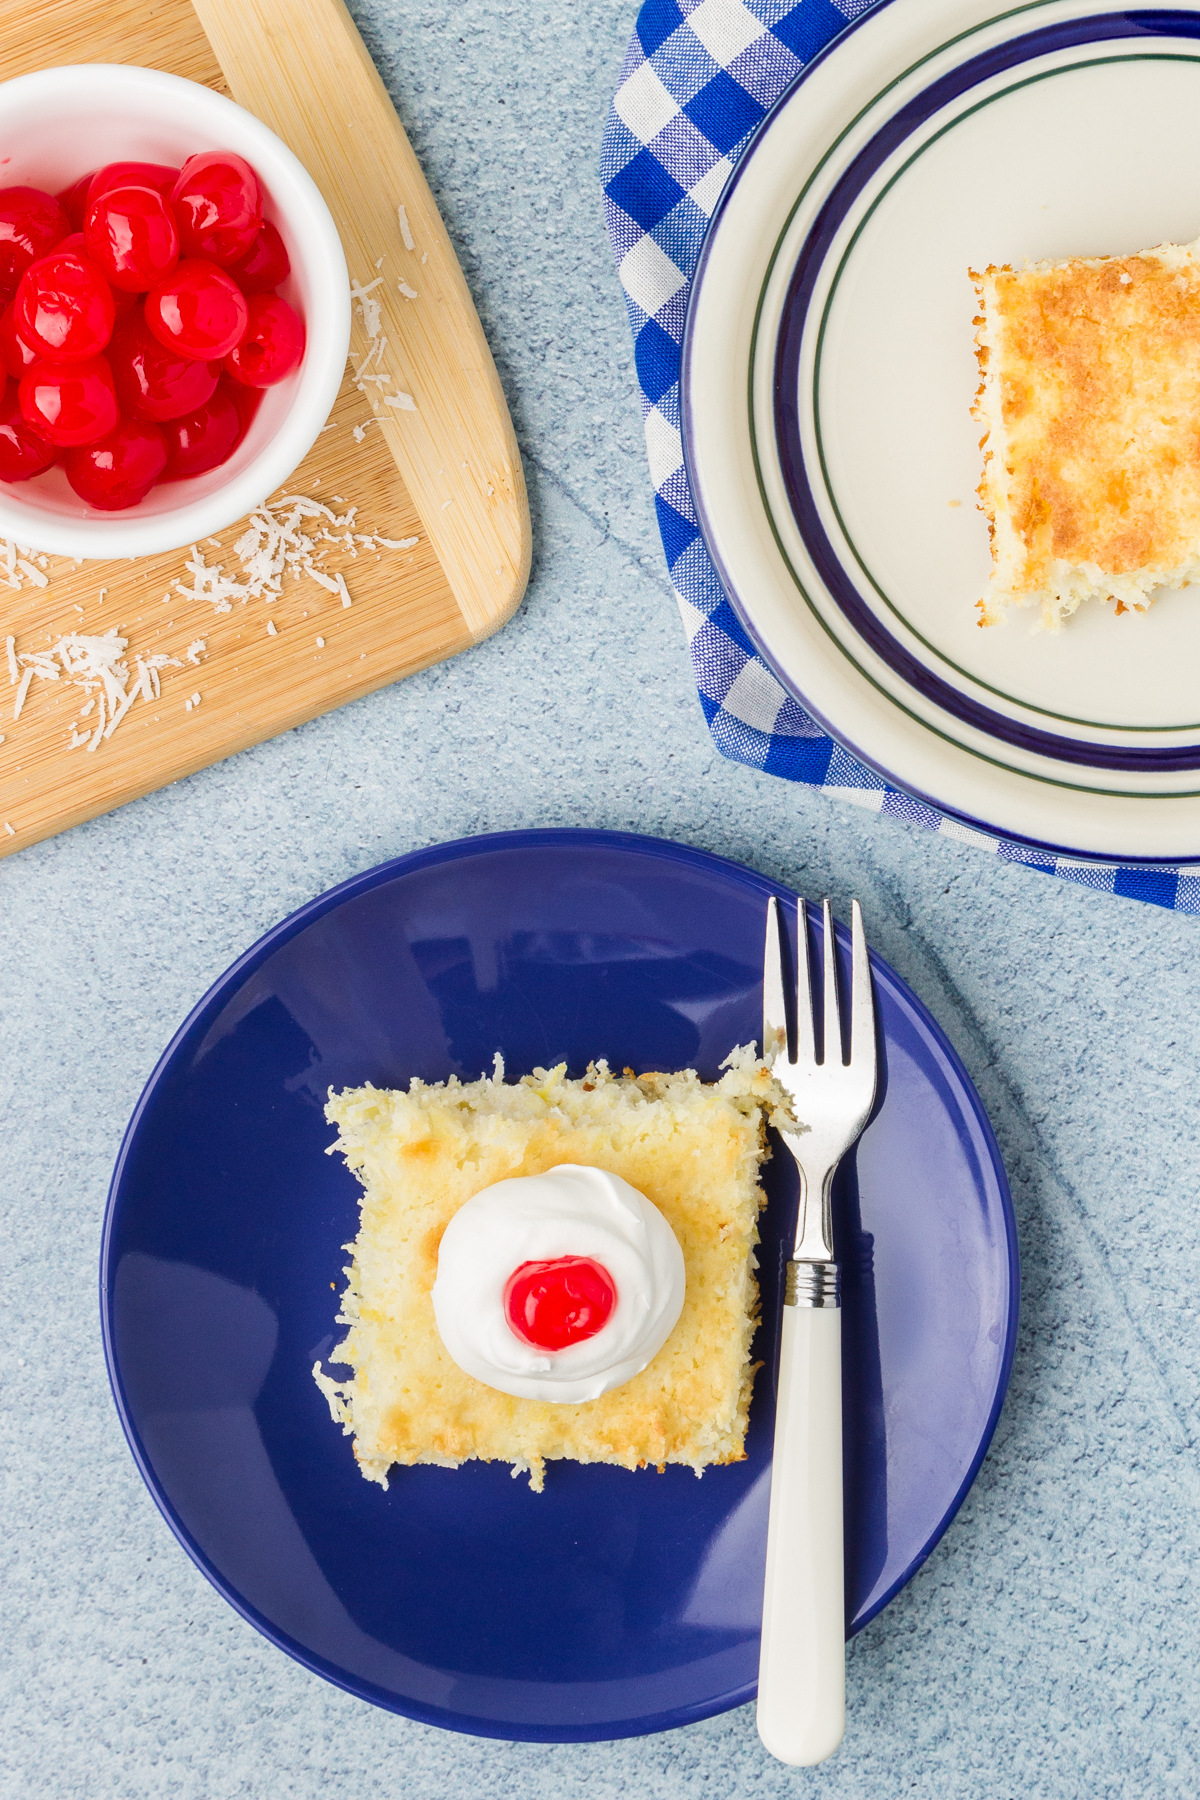 slice of pineapple coconut cake on a plate